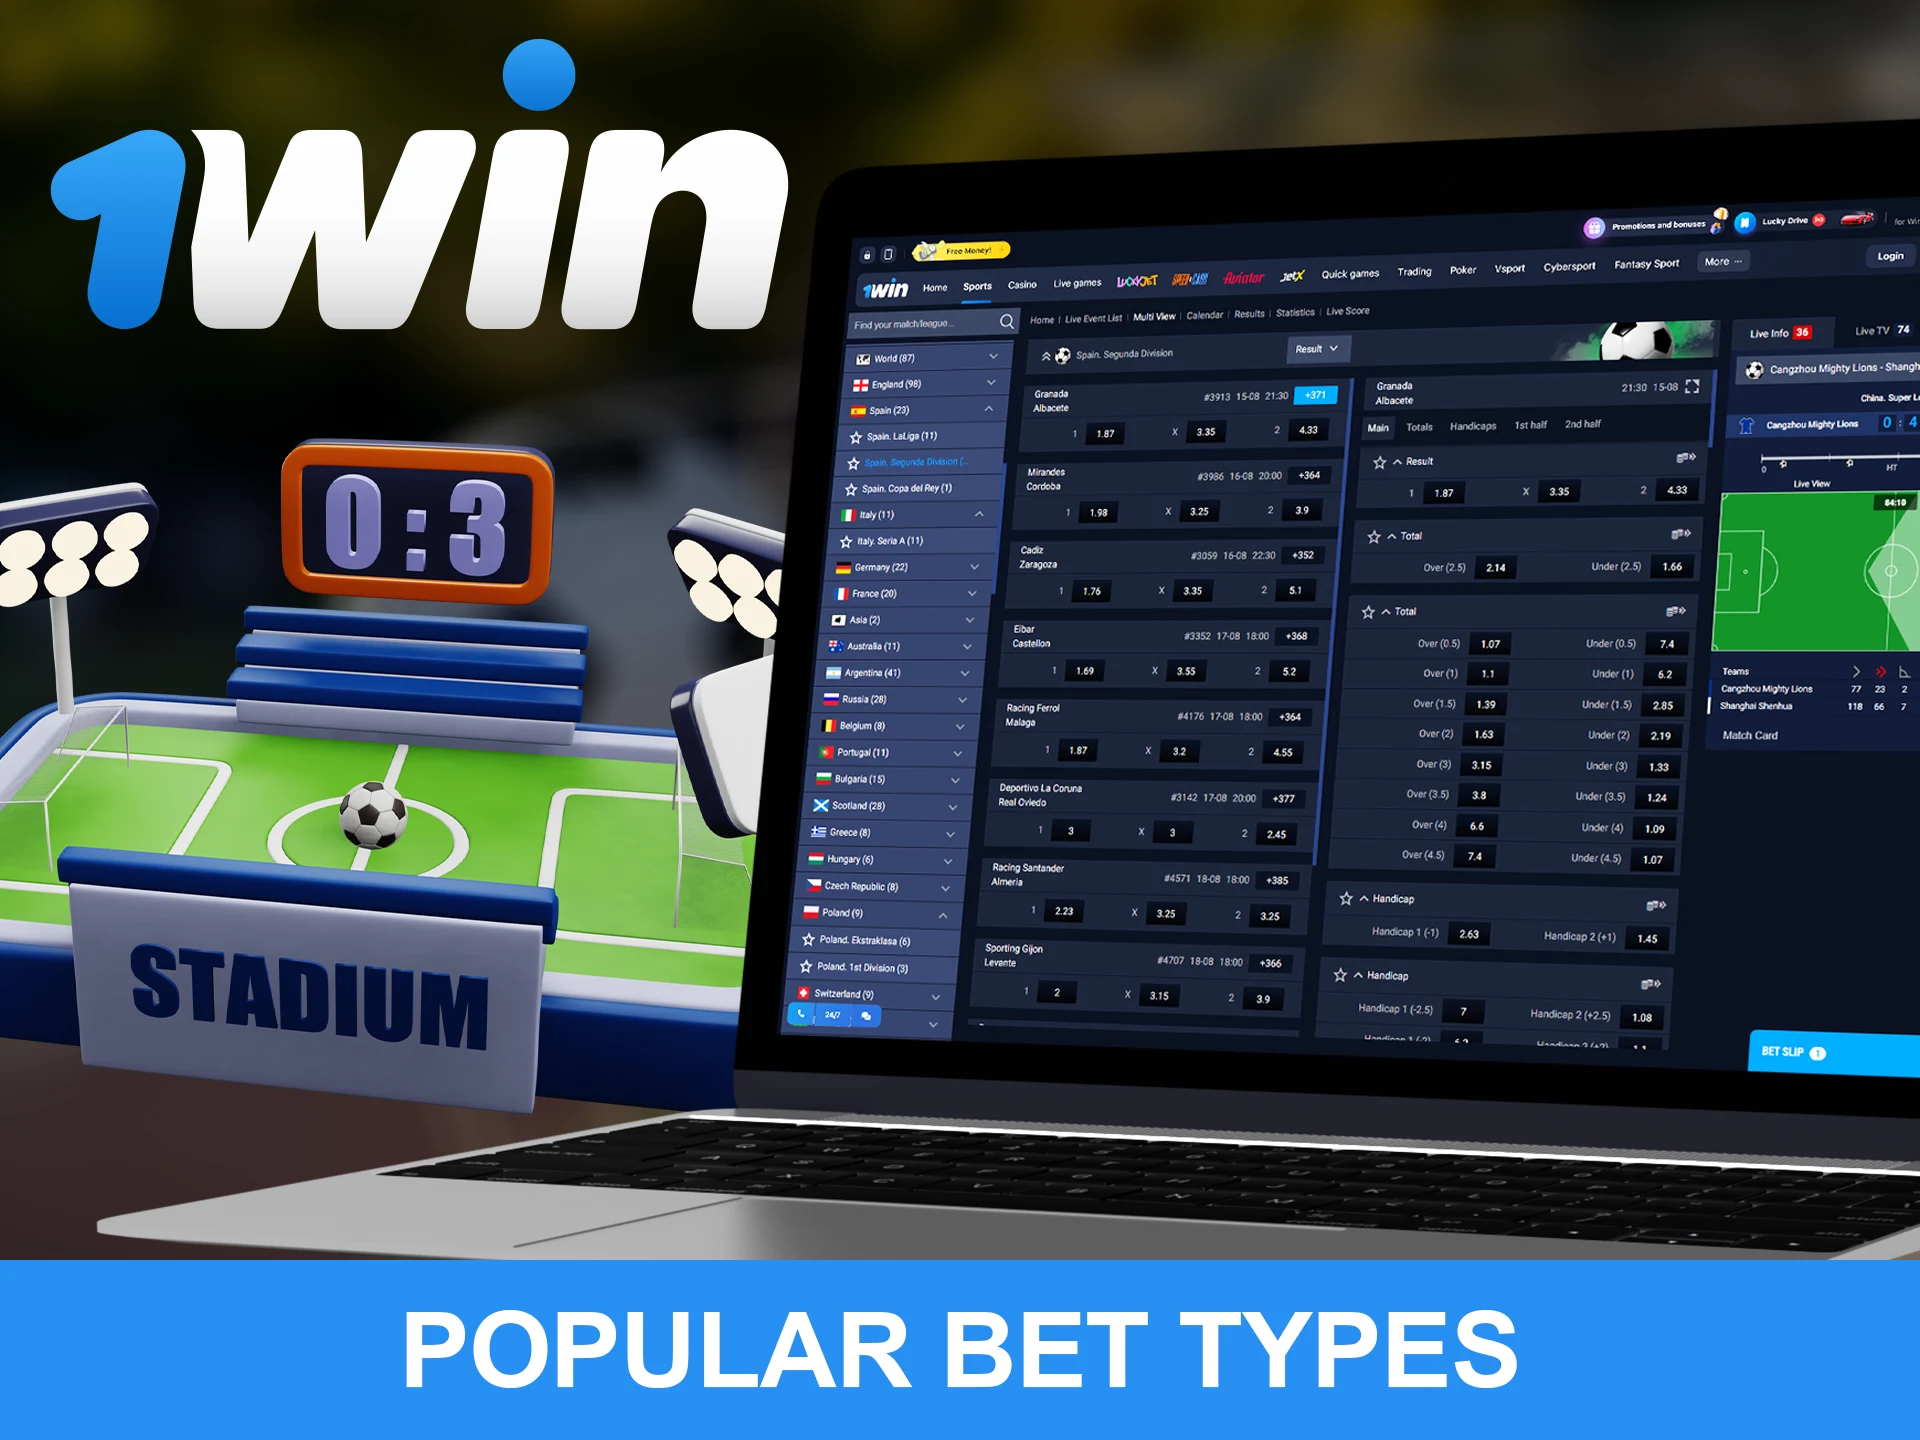 Go to 1win and explore the types of bets and their differences.